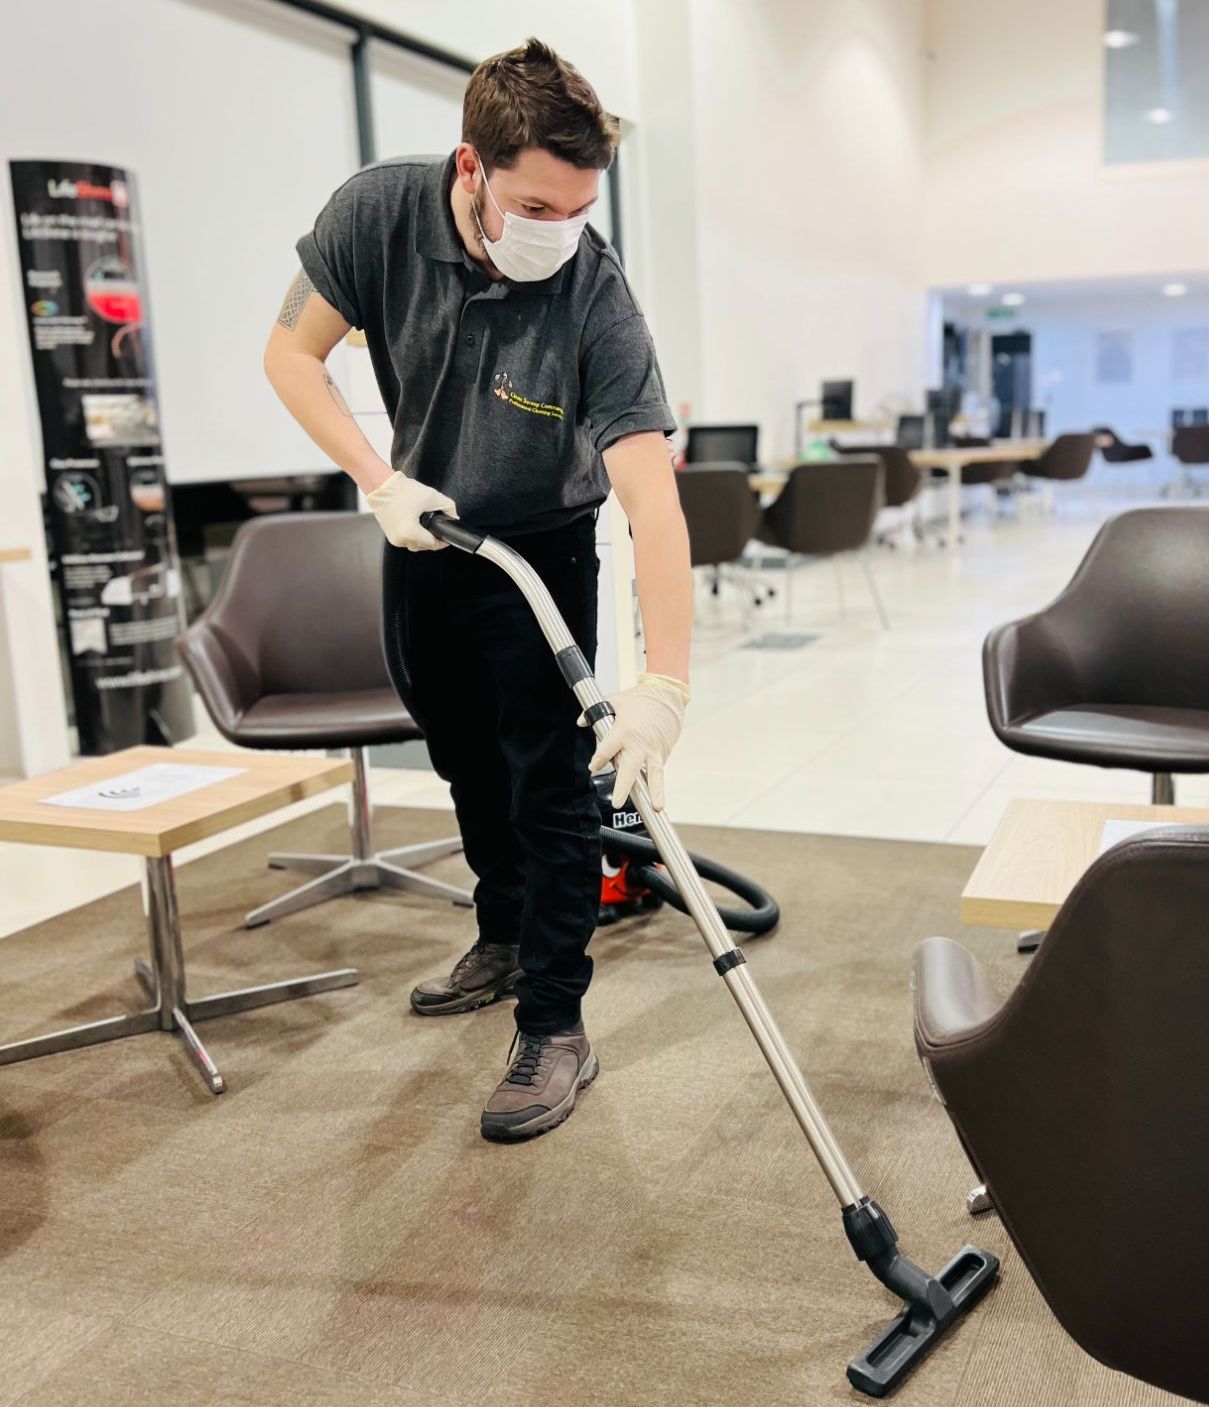 cleansweep-commercial--staff-vacuuming